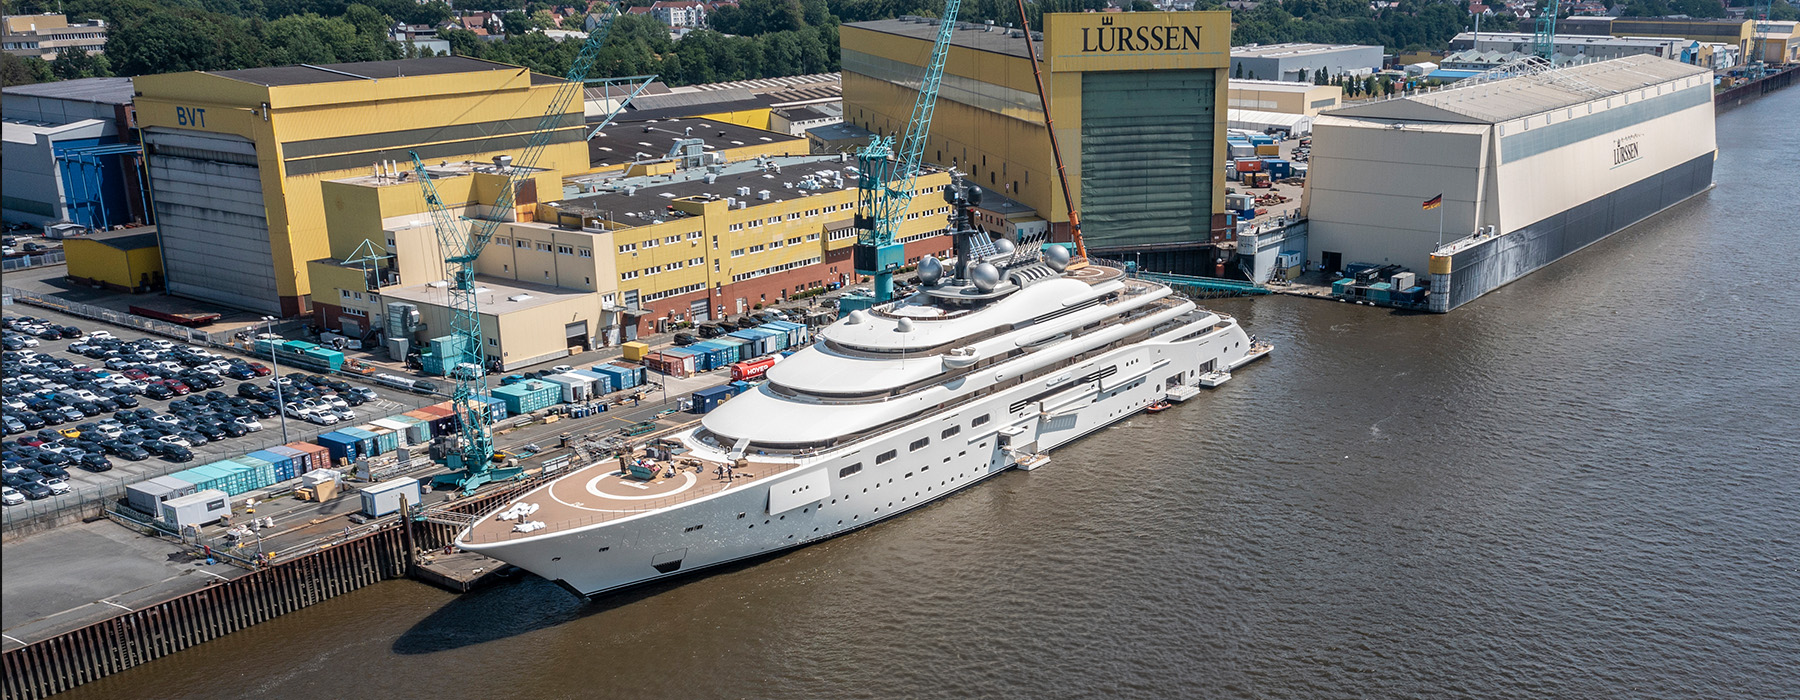 Ester III is one of the best German yachts built by Lurssen Yachts and sold by Fraser 